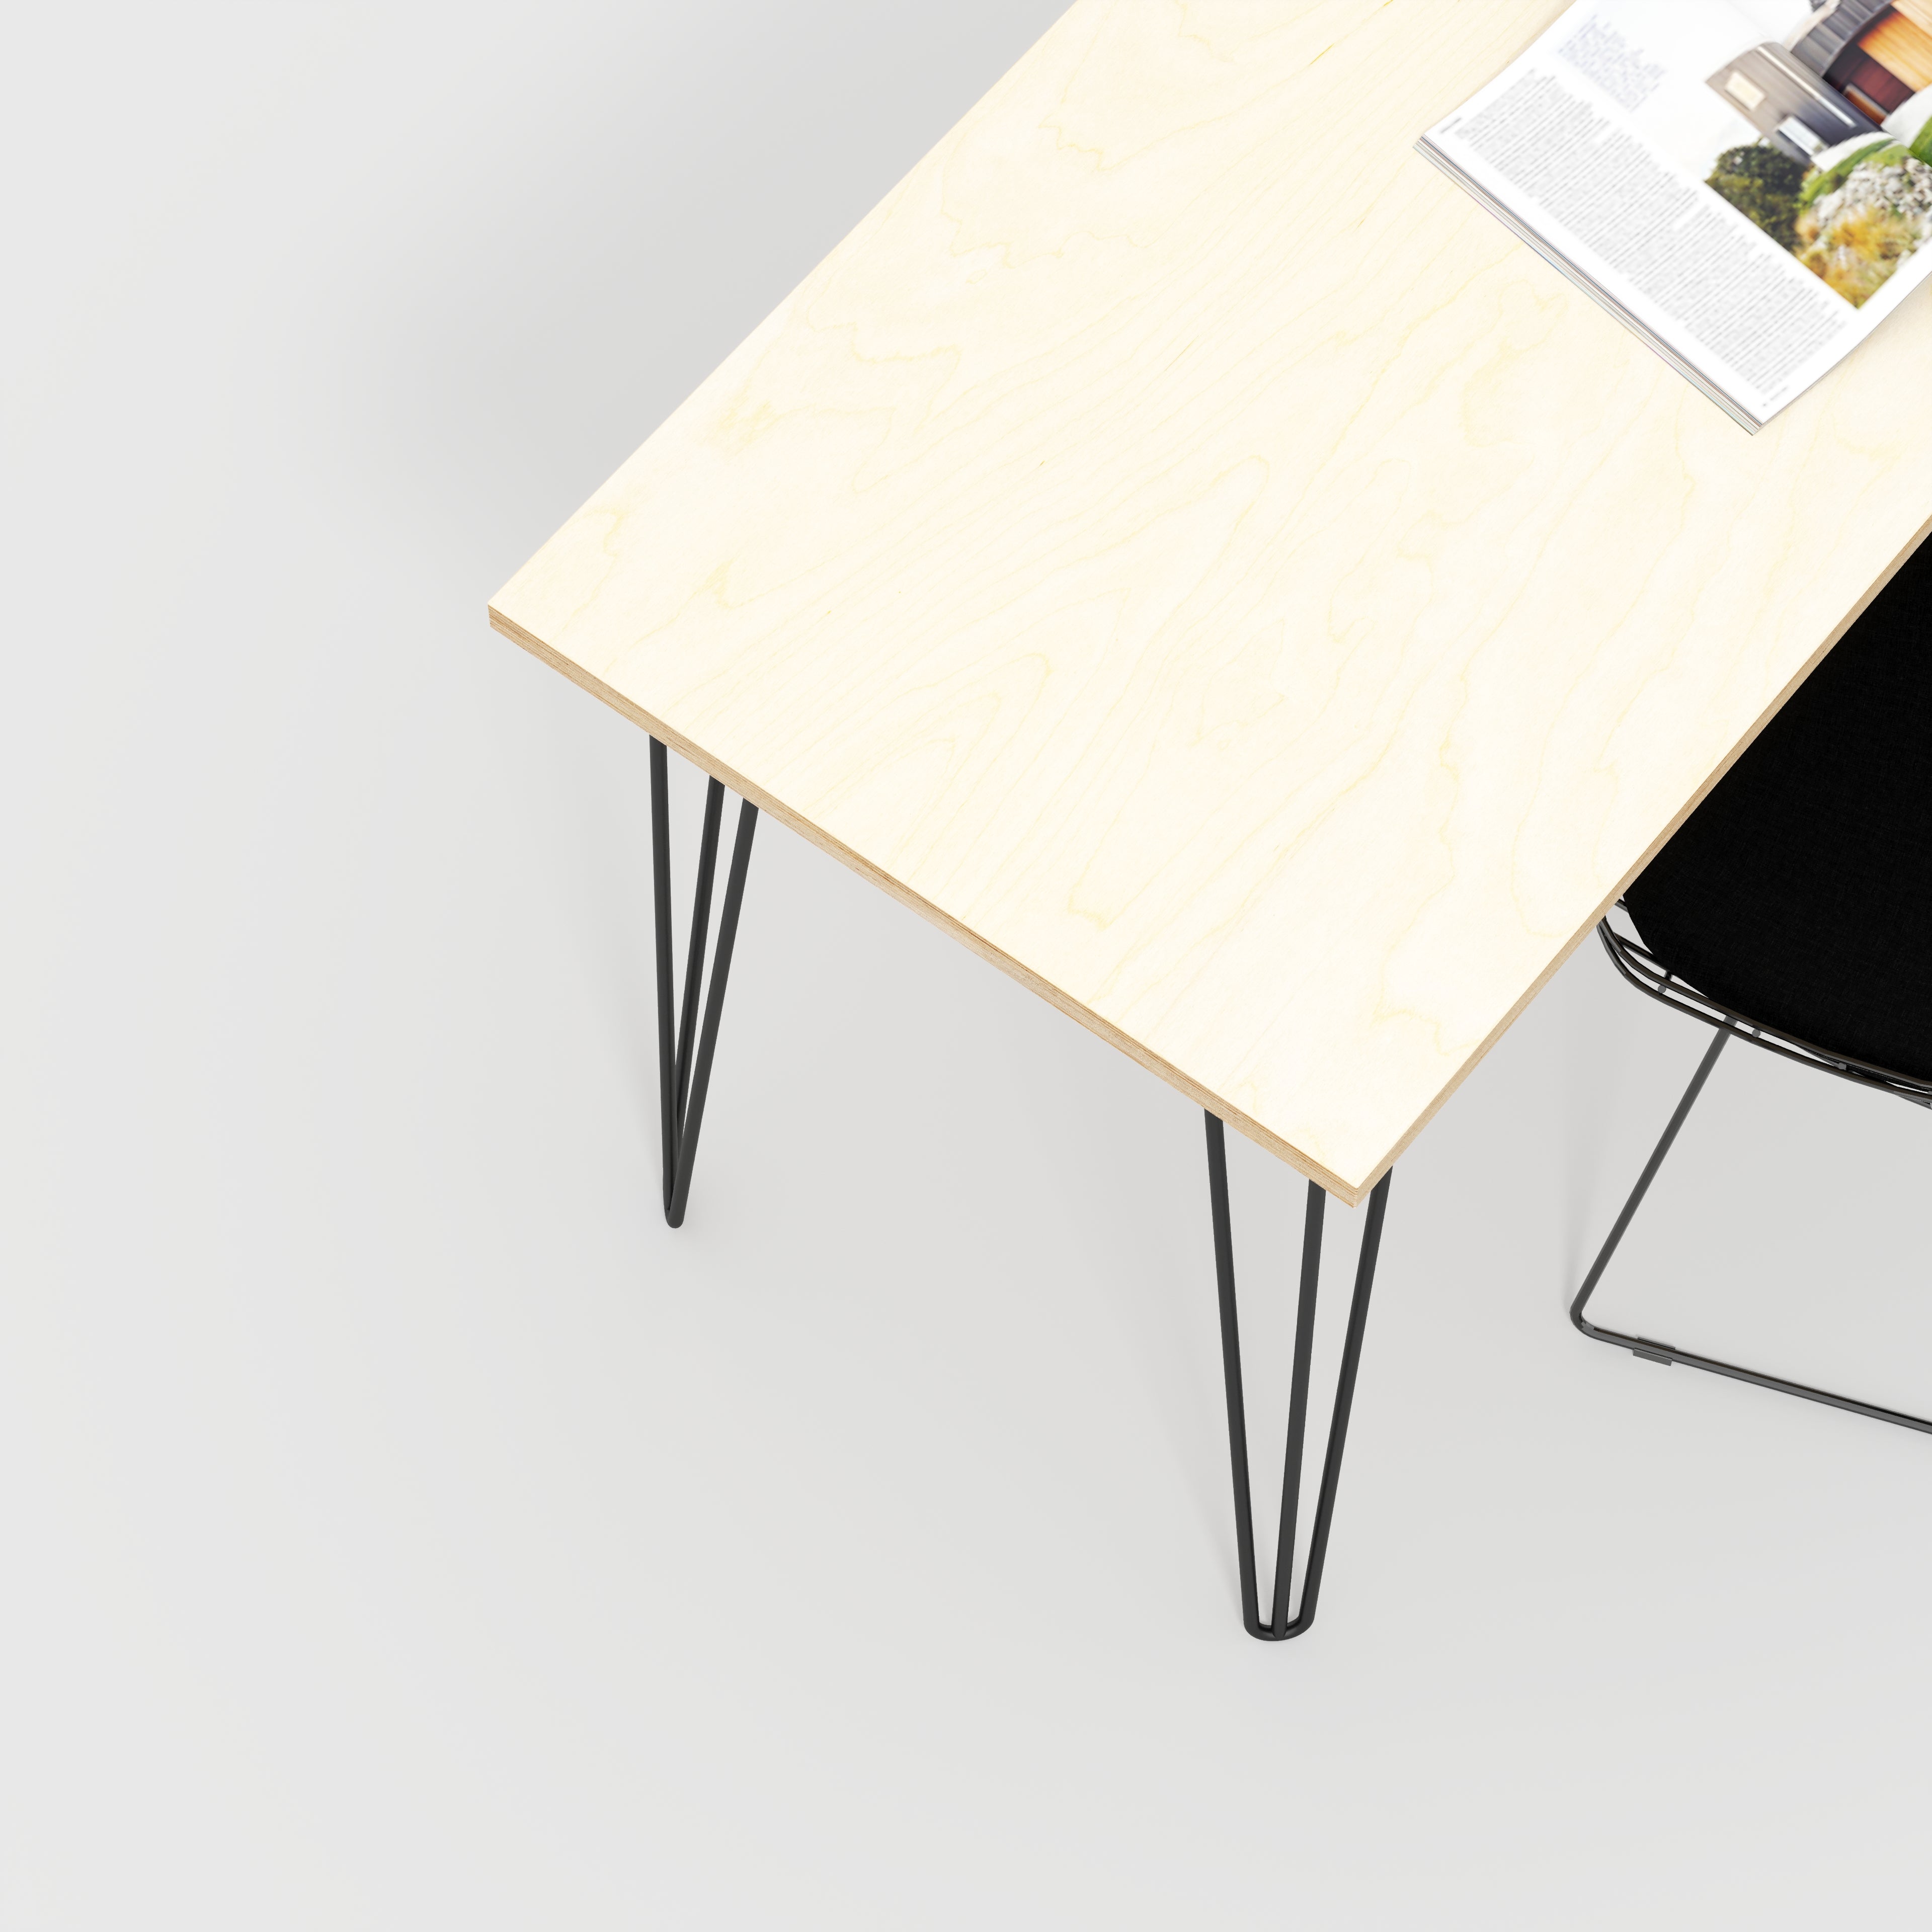 Custom Plywood Desk with Hairpin Legs